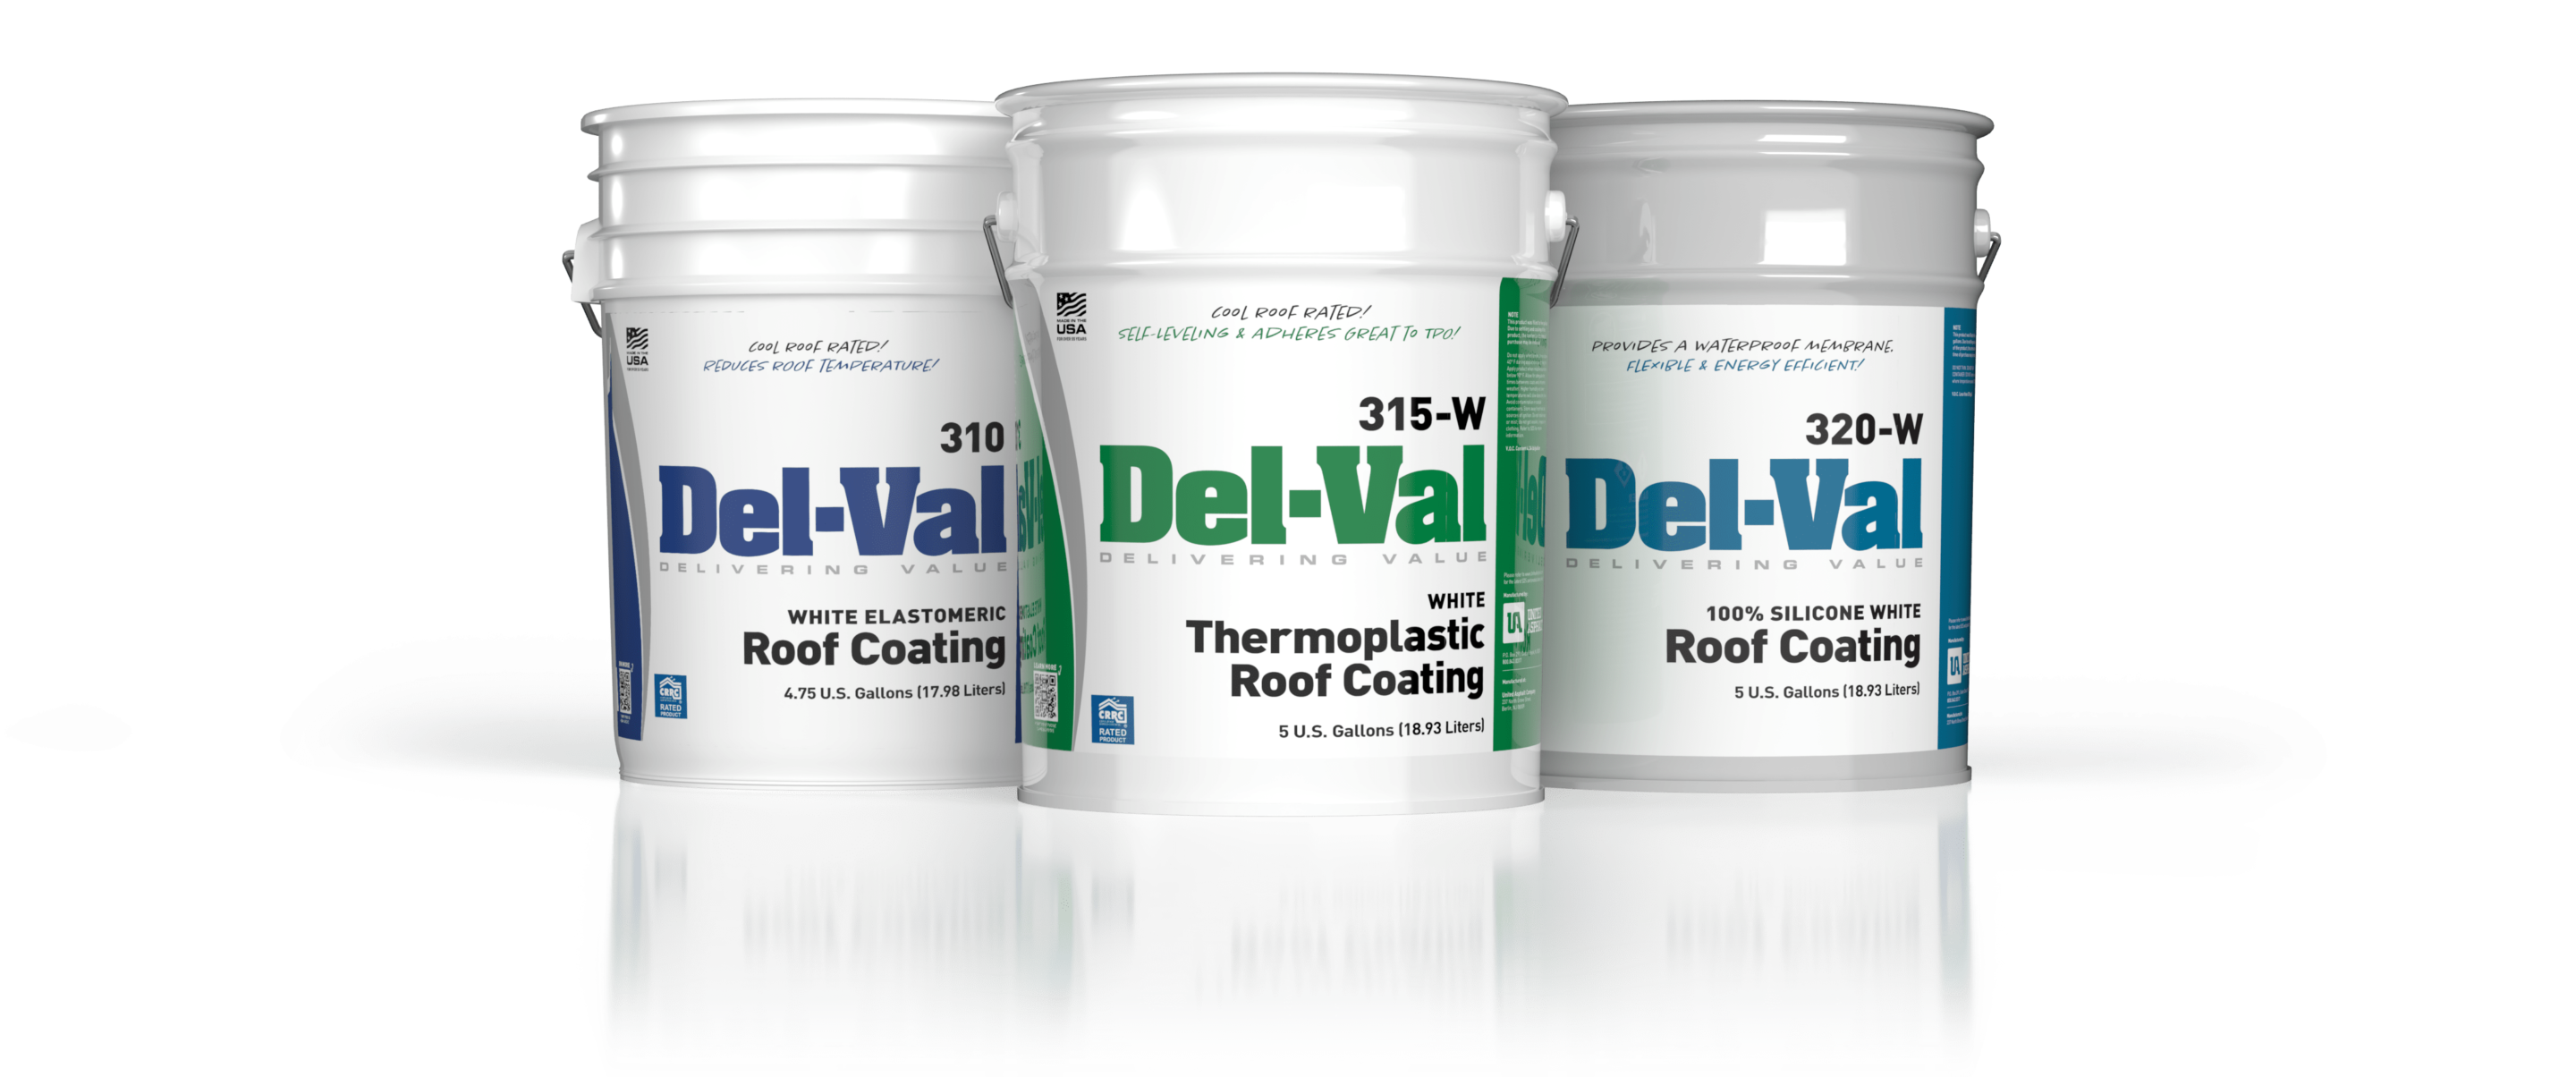 Del-Val Roof Coatings Featured Pails